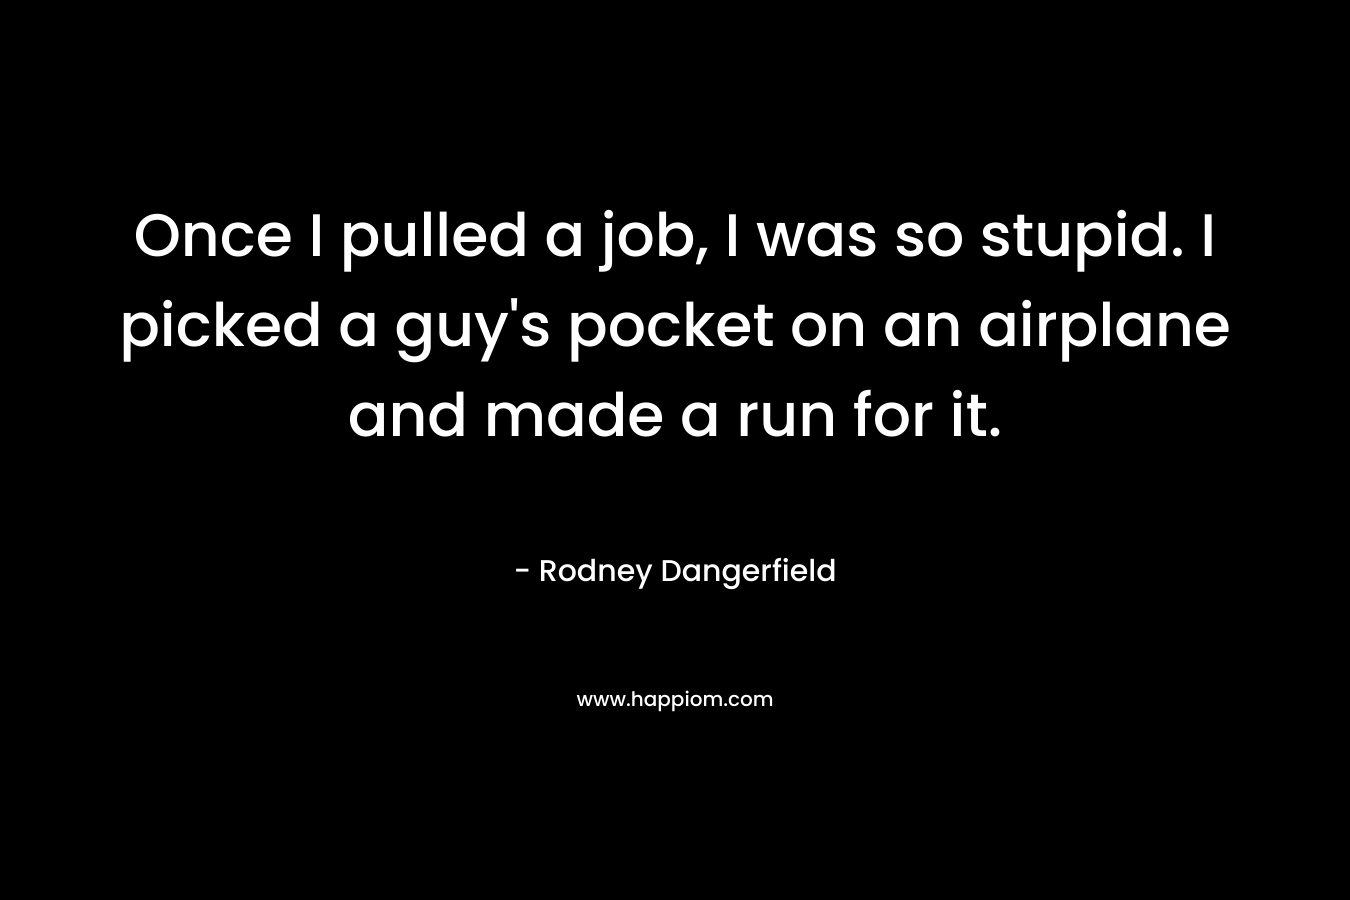 Once I pulled a job, I was so stupid. I picked a guy's pocket on an airplane and made a run for it.